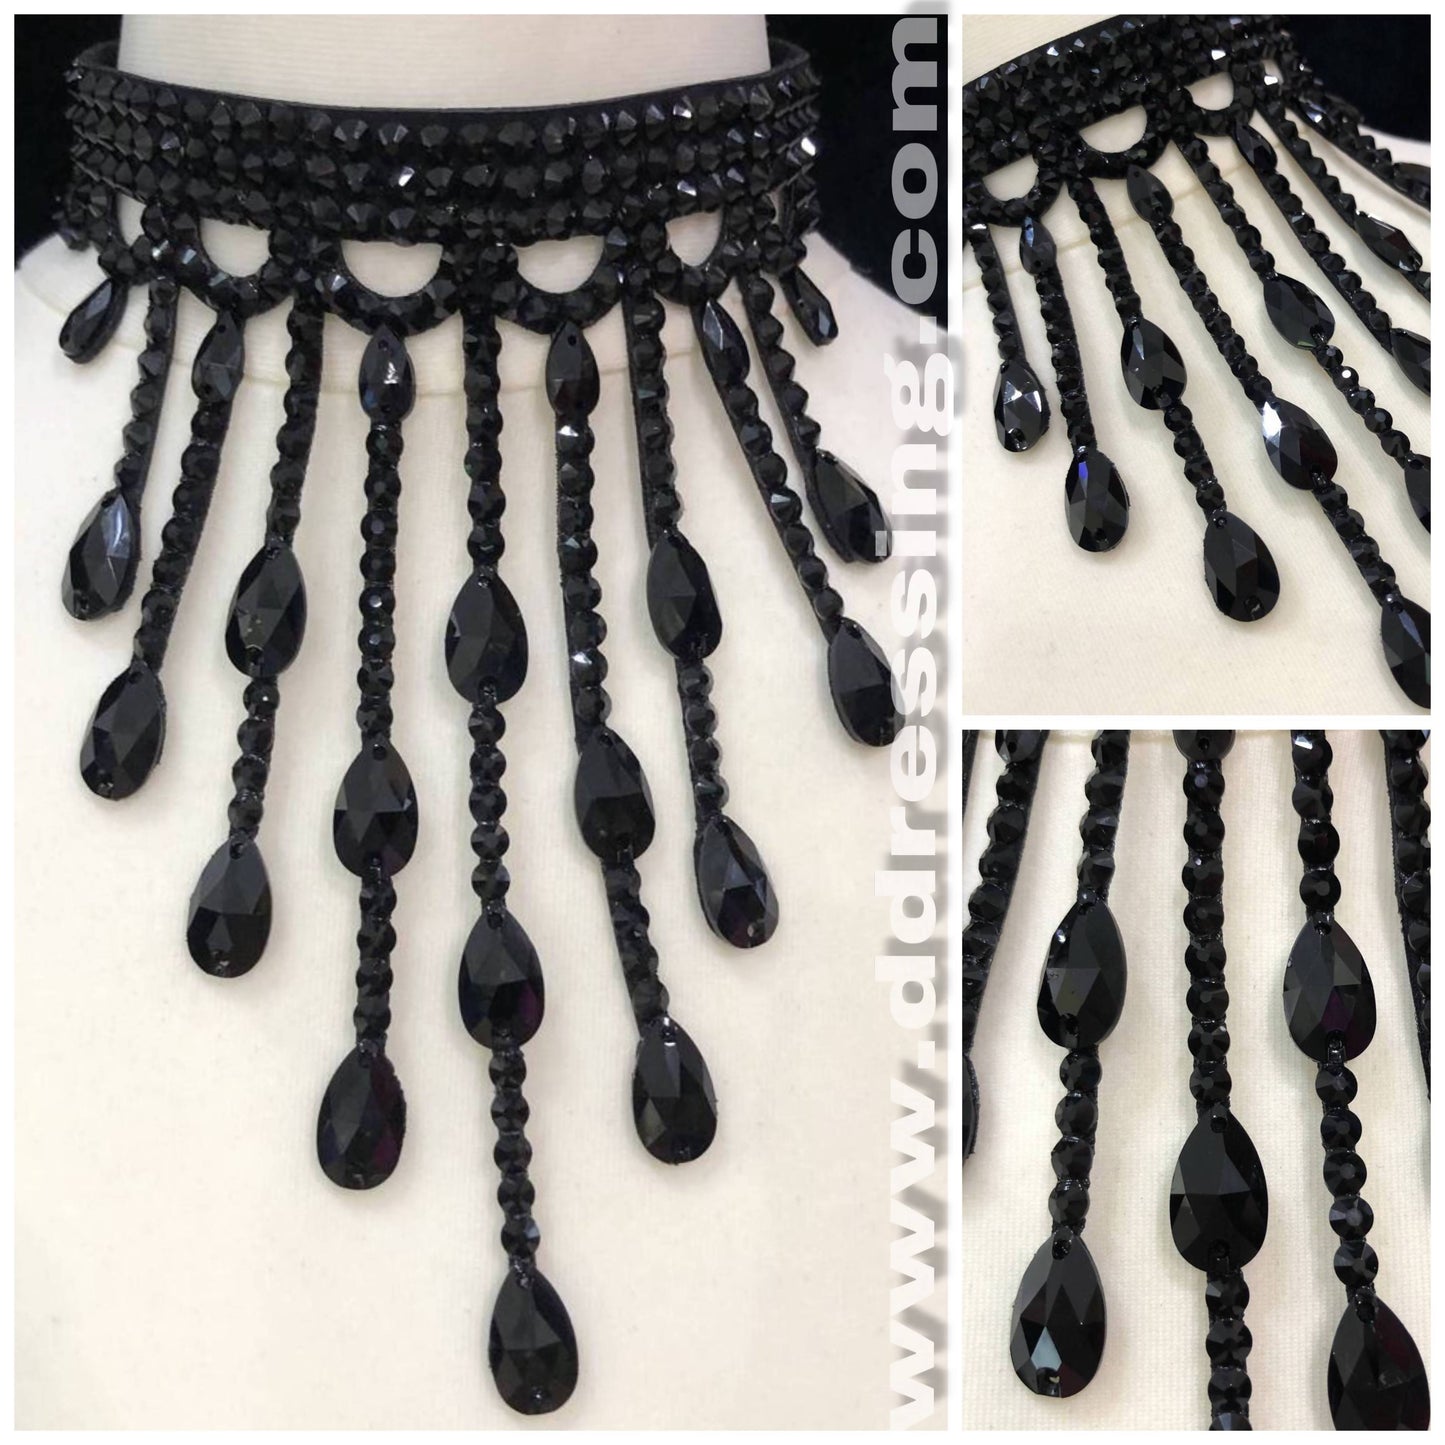 Daring Droplets Necklace